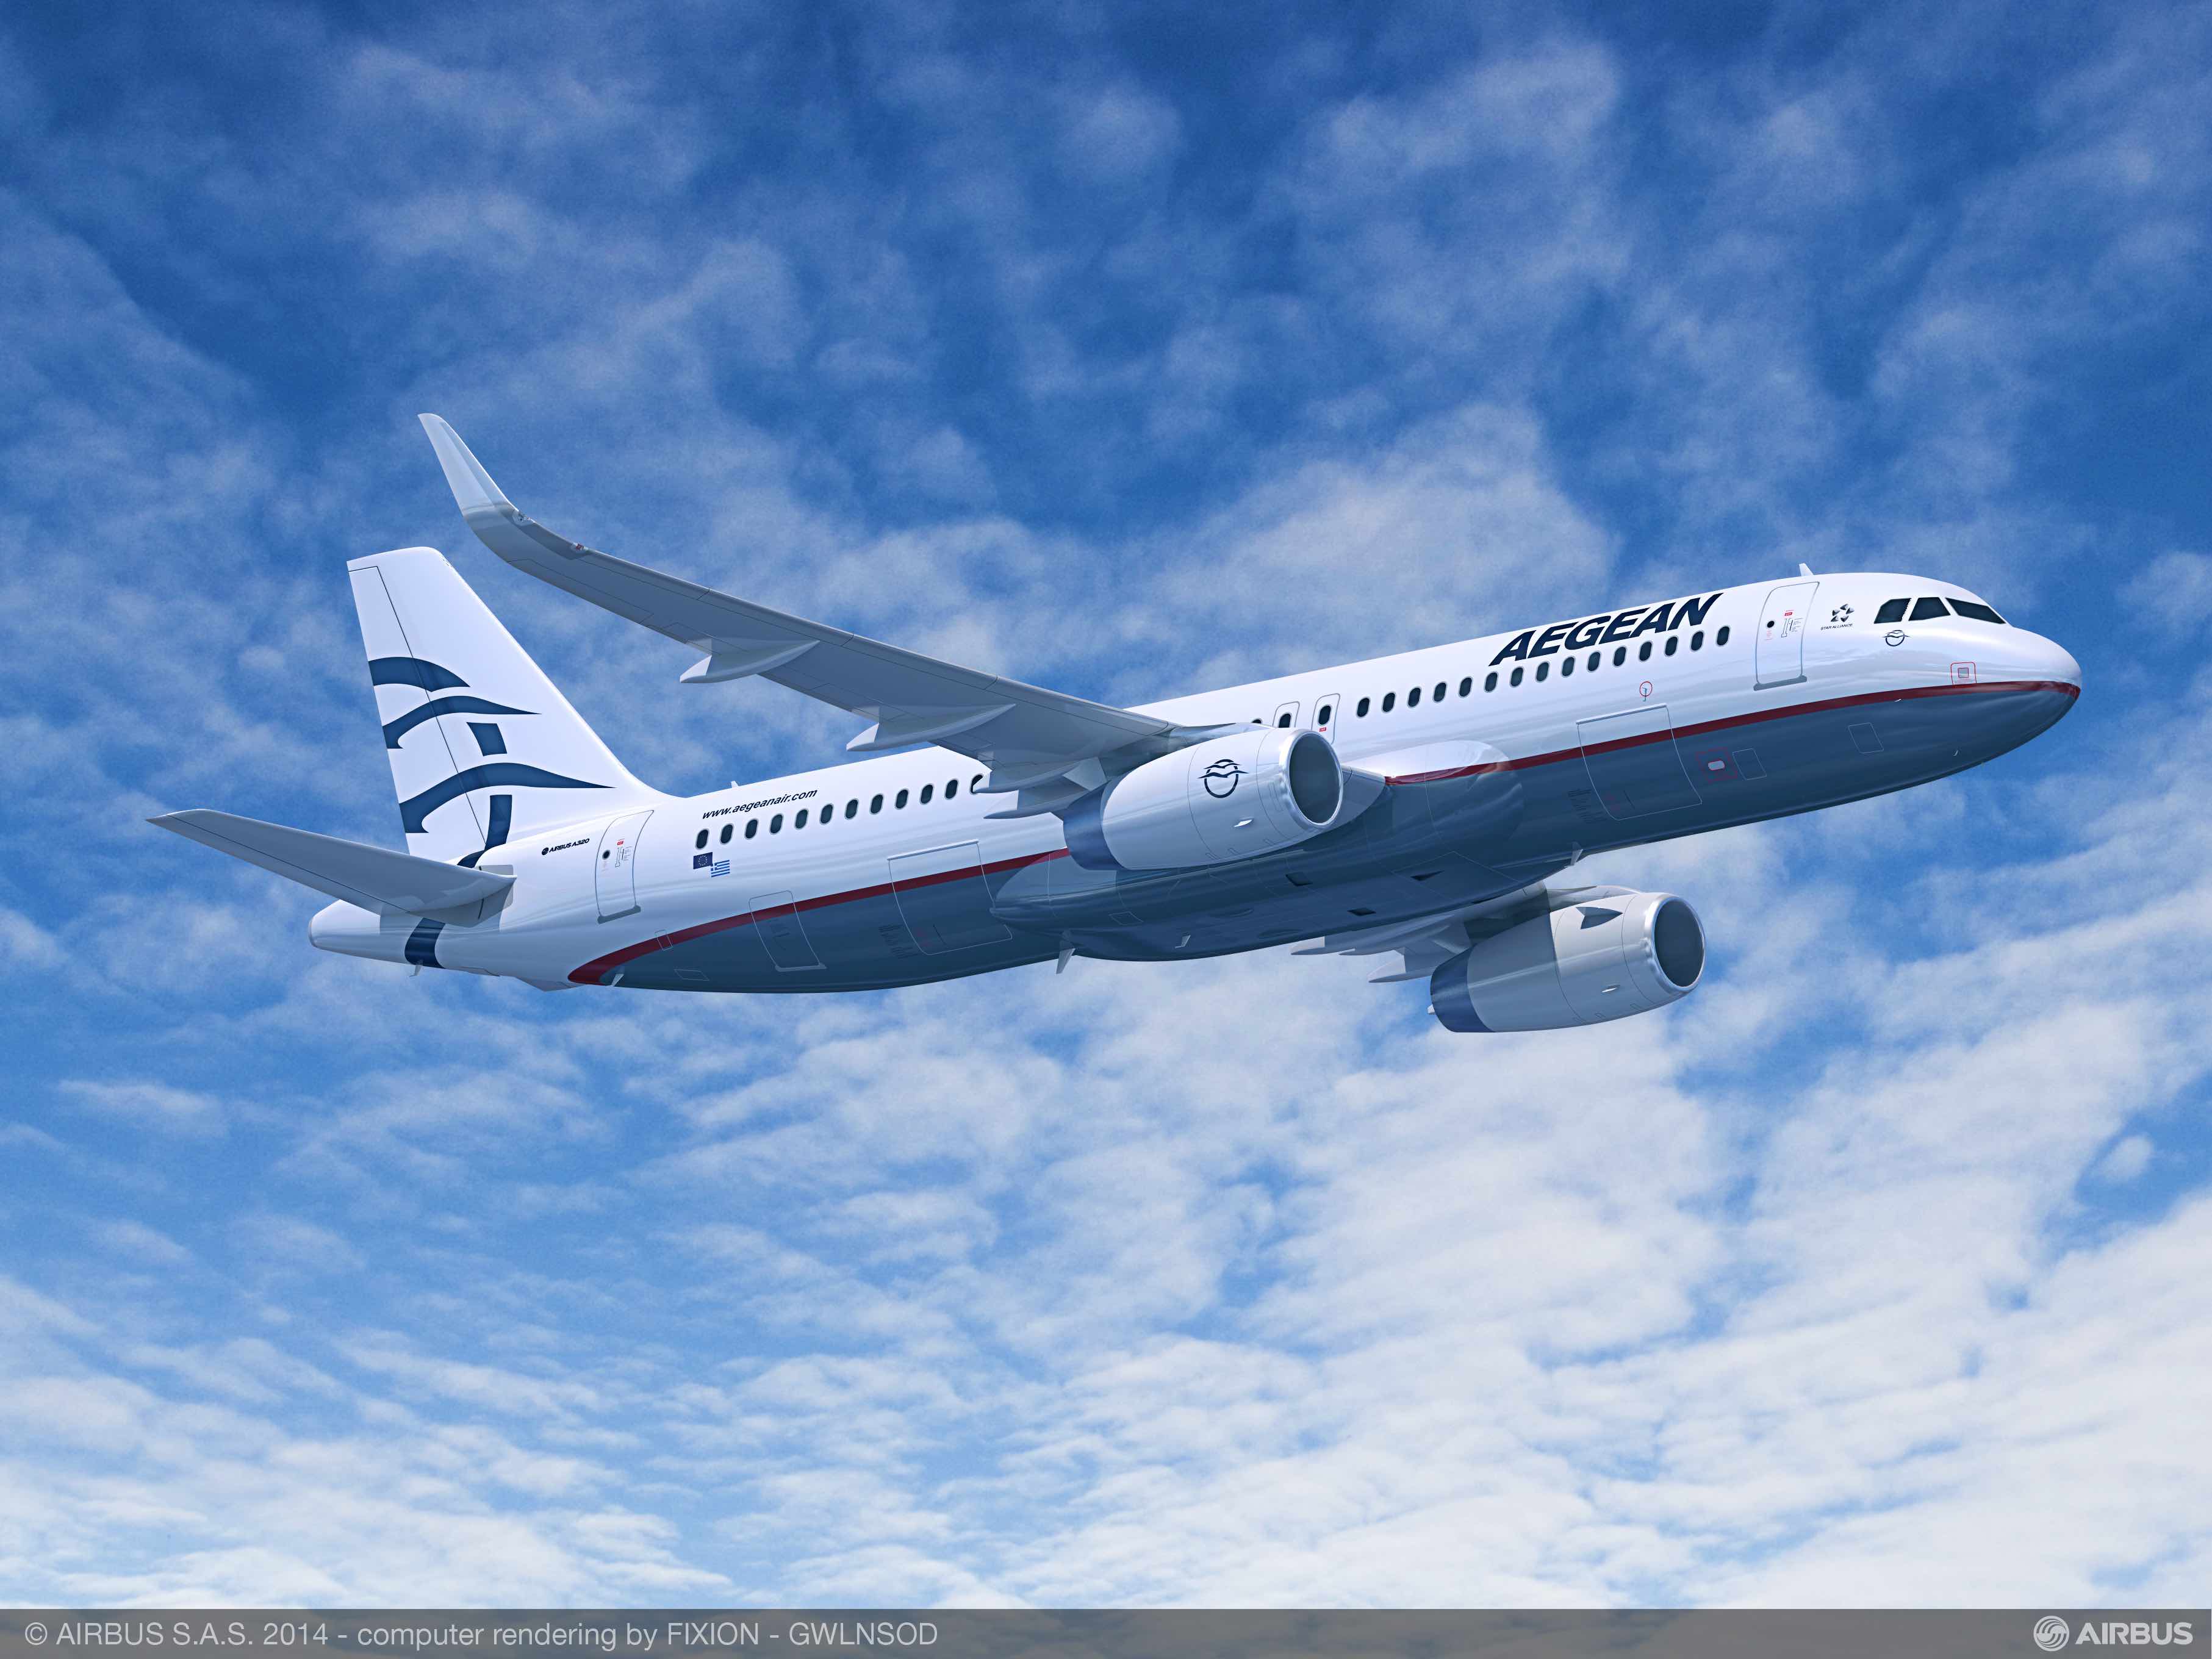 Aegean Airlines signe pour 42 Airbus A320neo